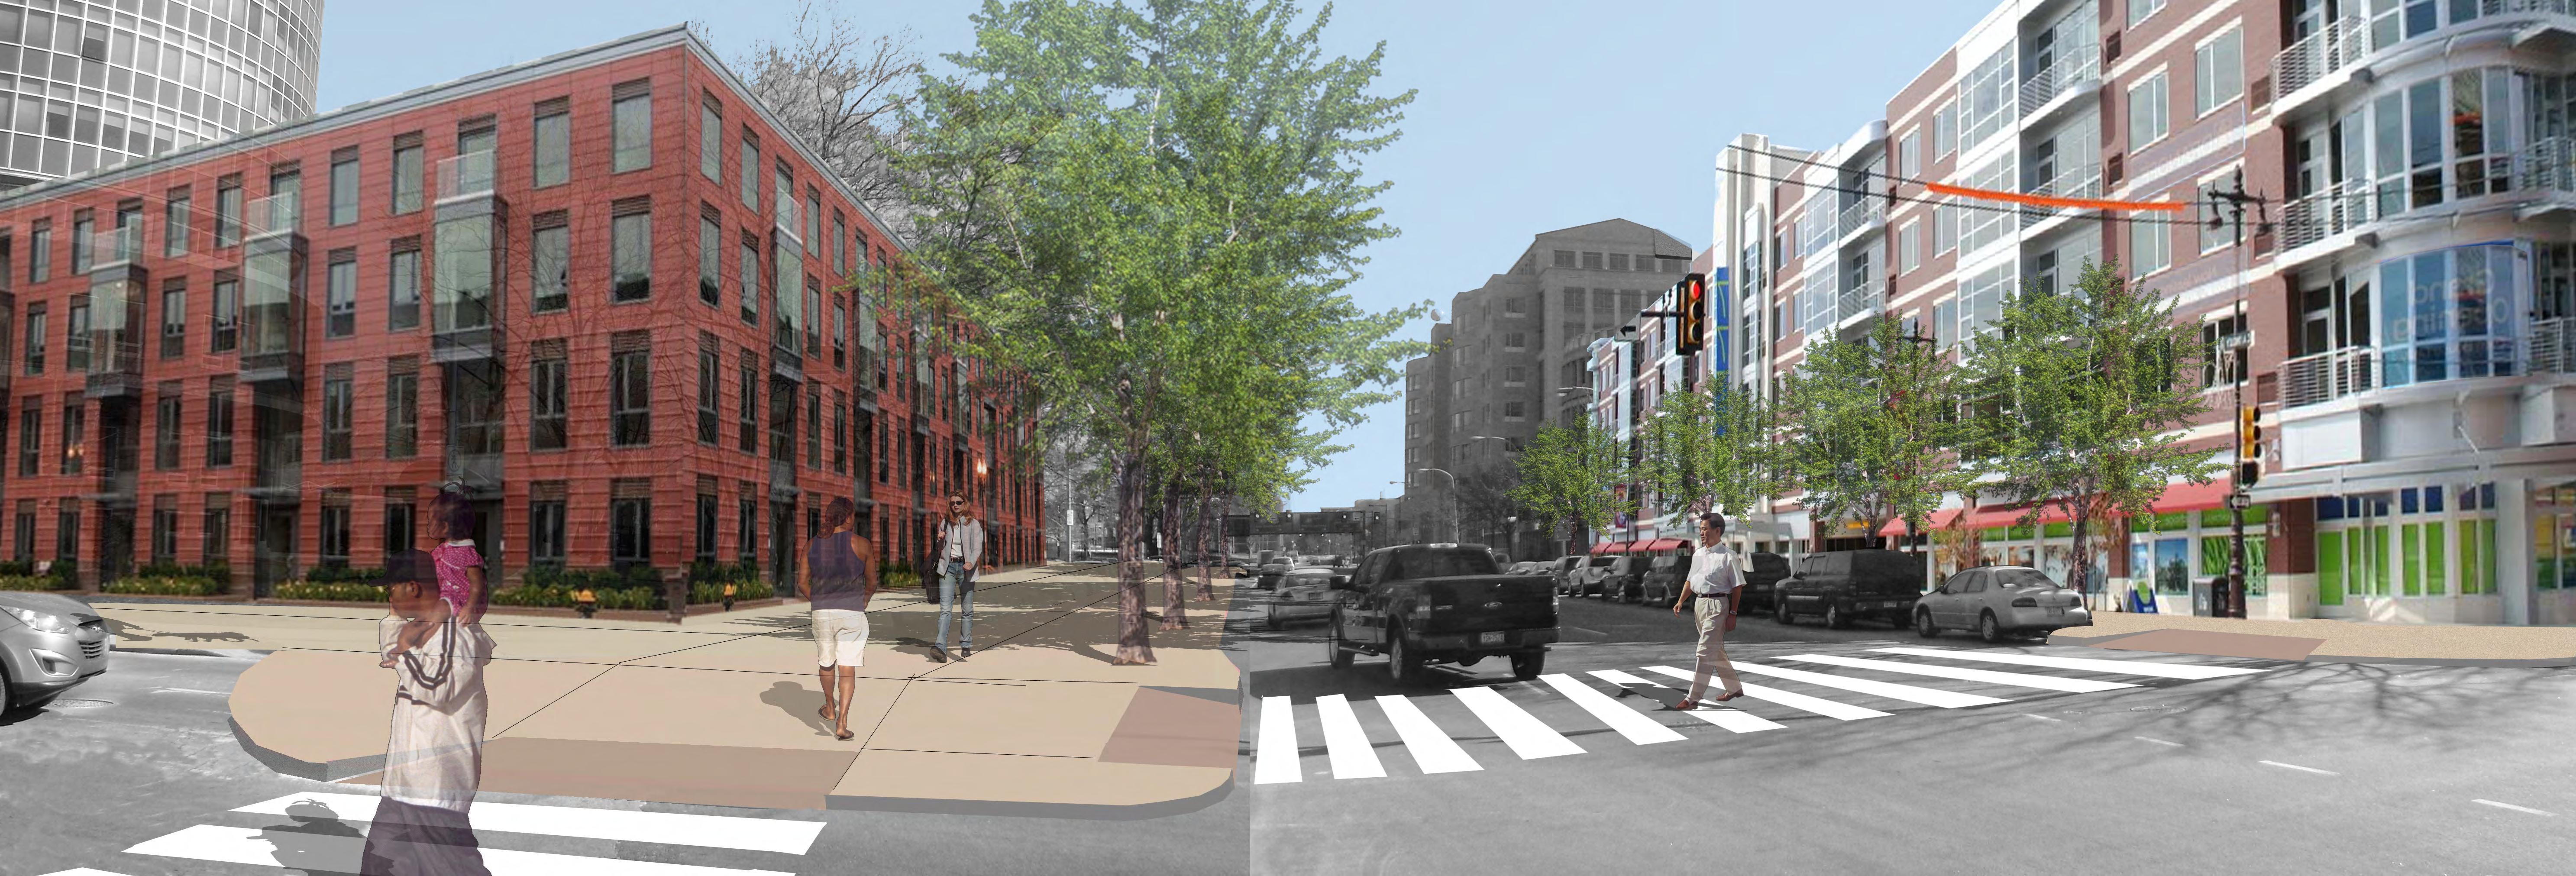 What 8th and Race Street, near Franklin Square, could look like